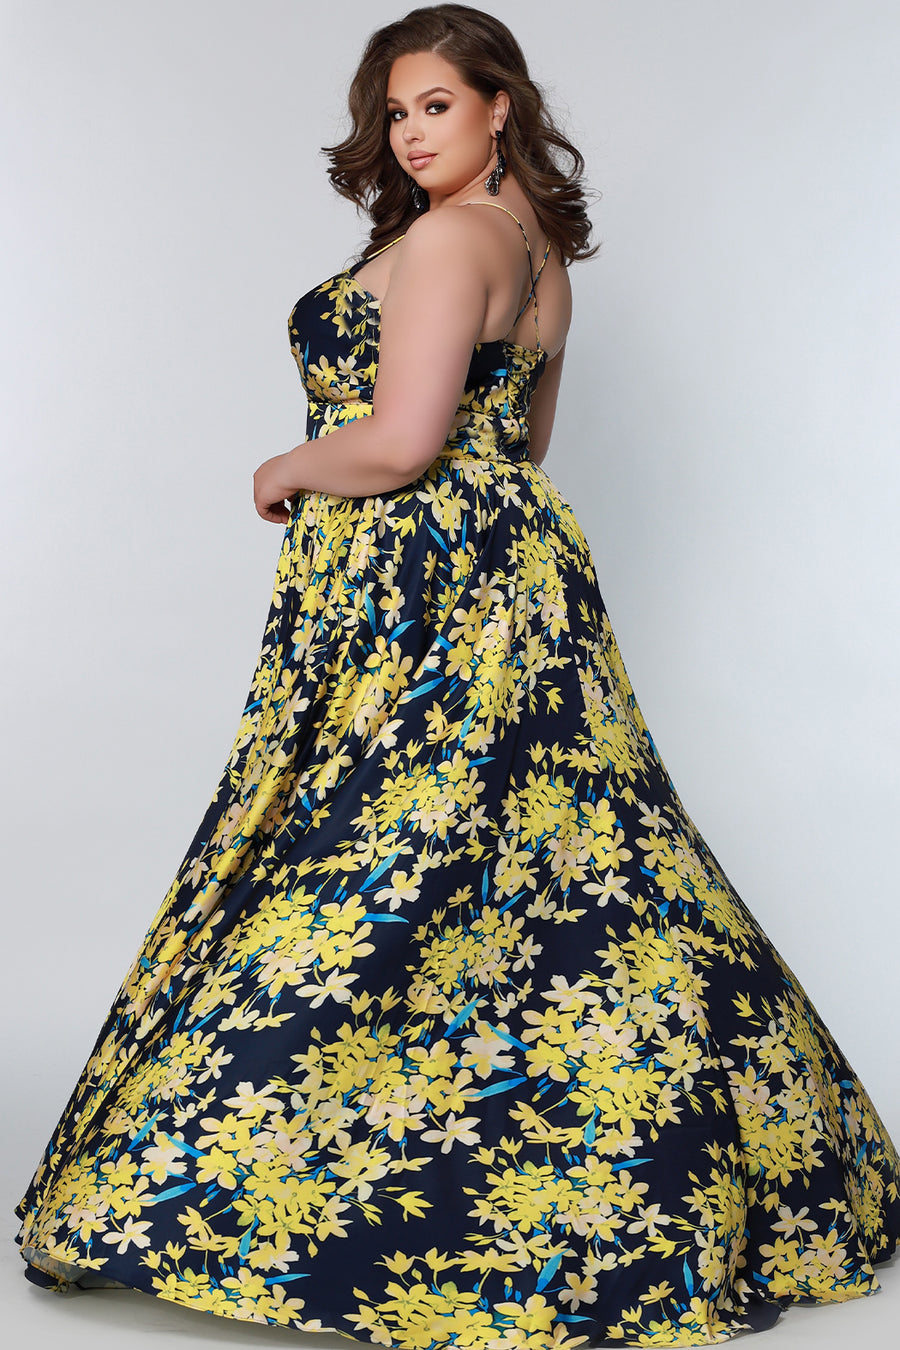 CE2206 Celebrations by Sydney's Closet aline silhouette with sweetheart neckline and spaghetti straps dress features zipper back with leg slit and pockets available in pink blossom and yellow blossom